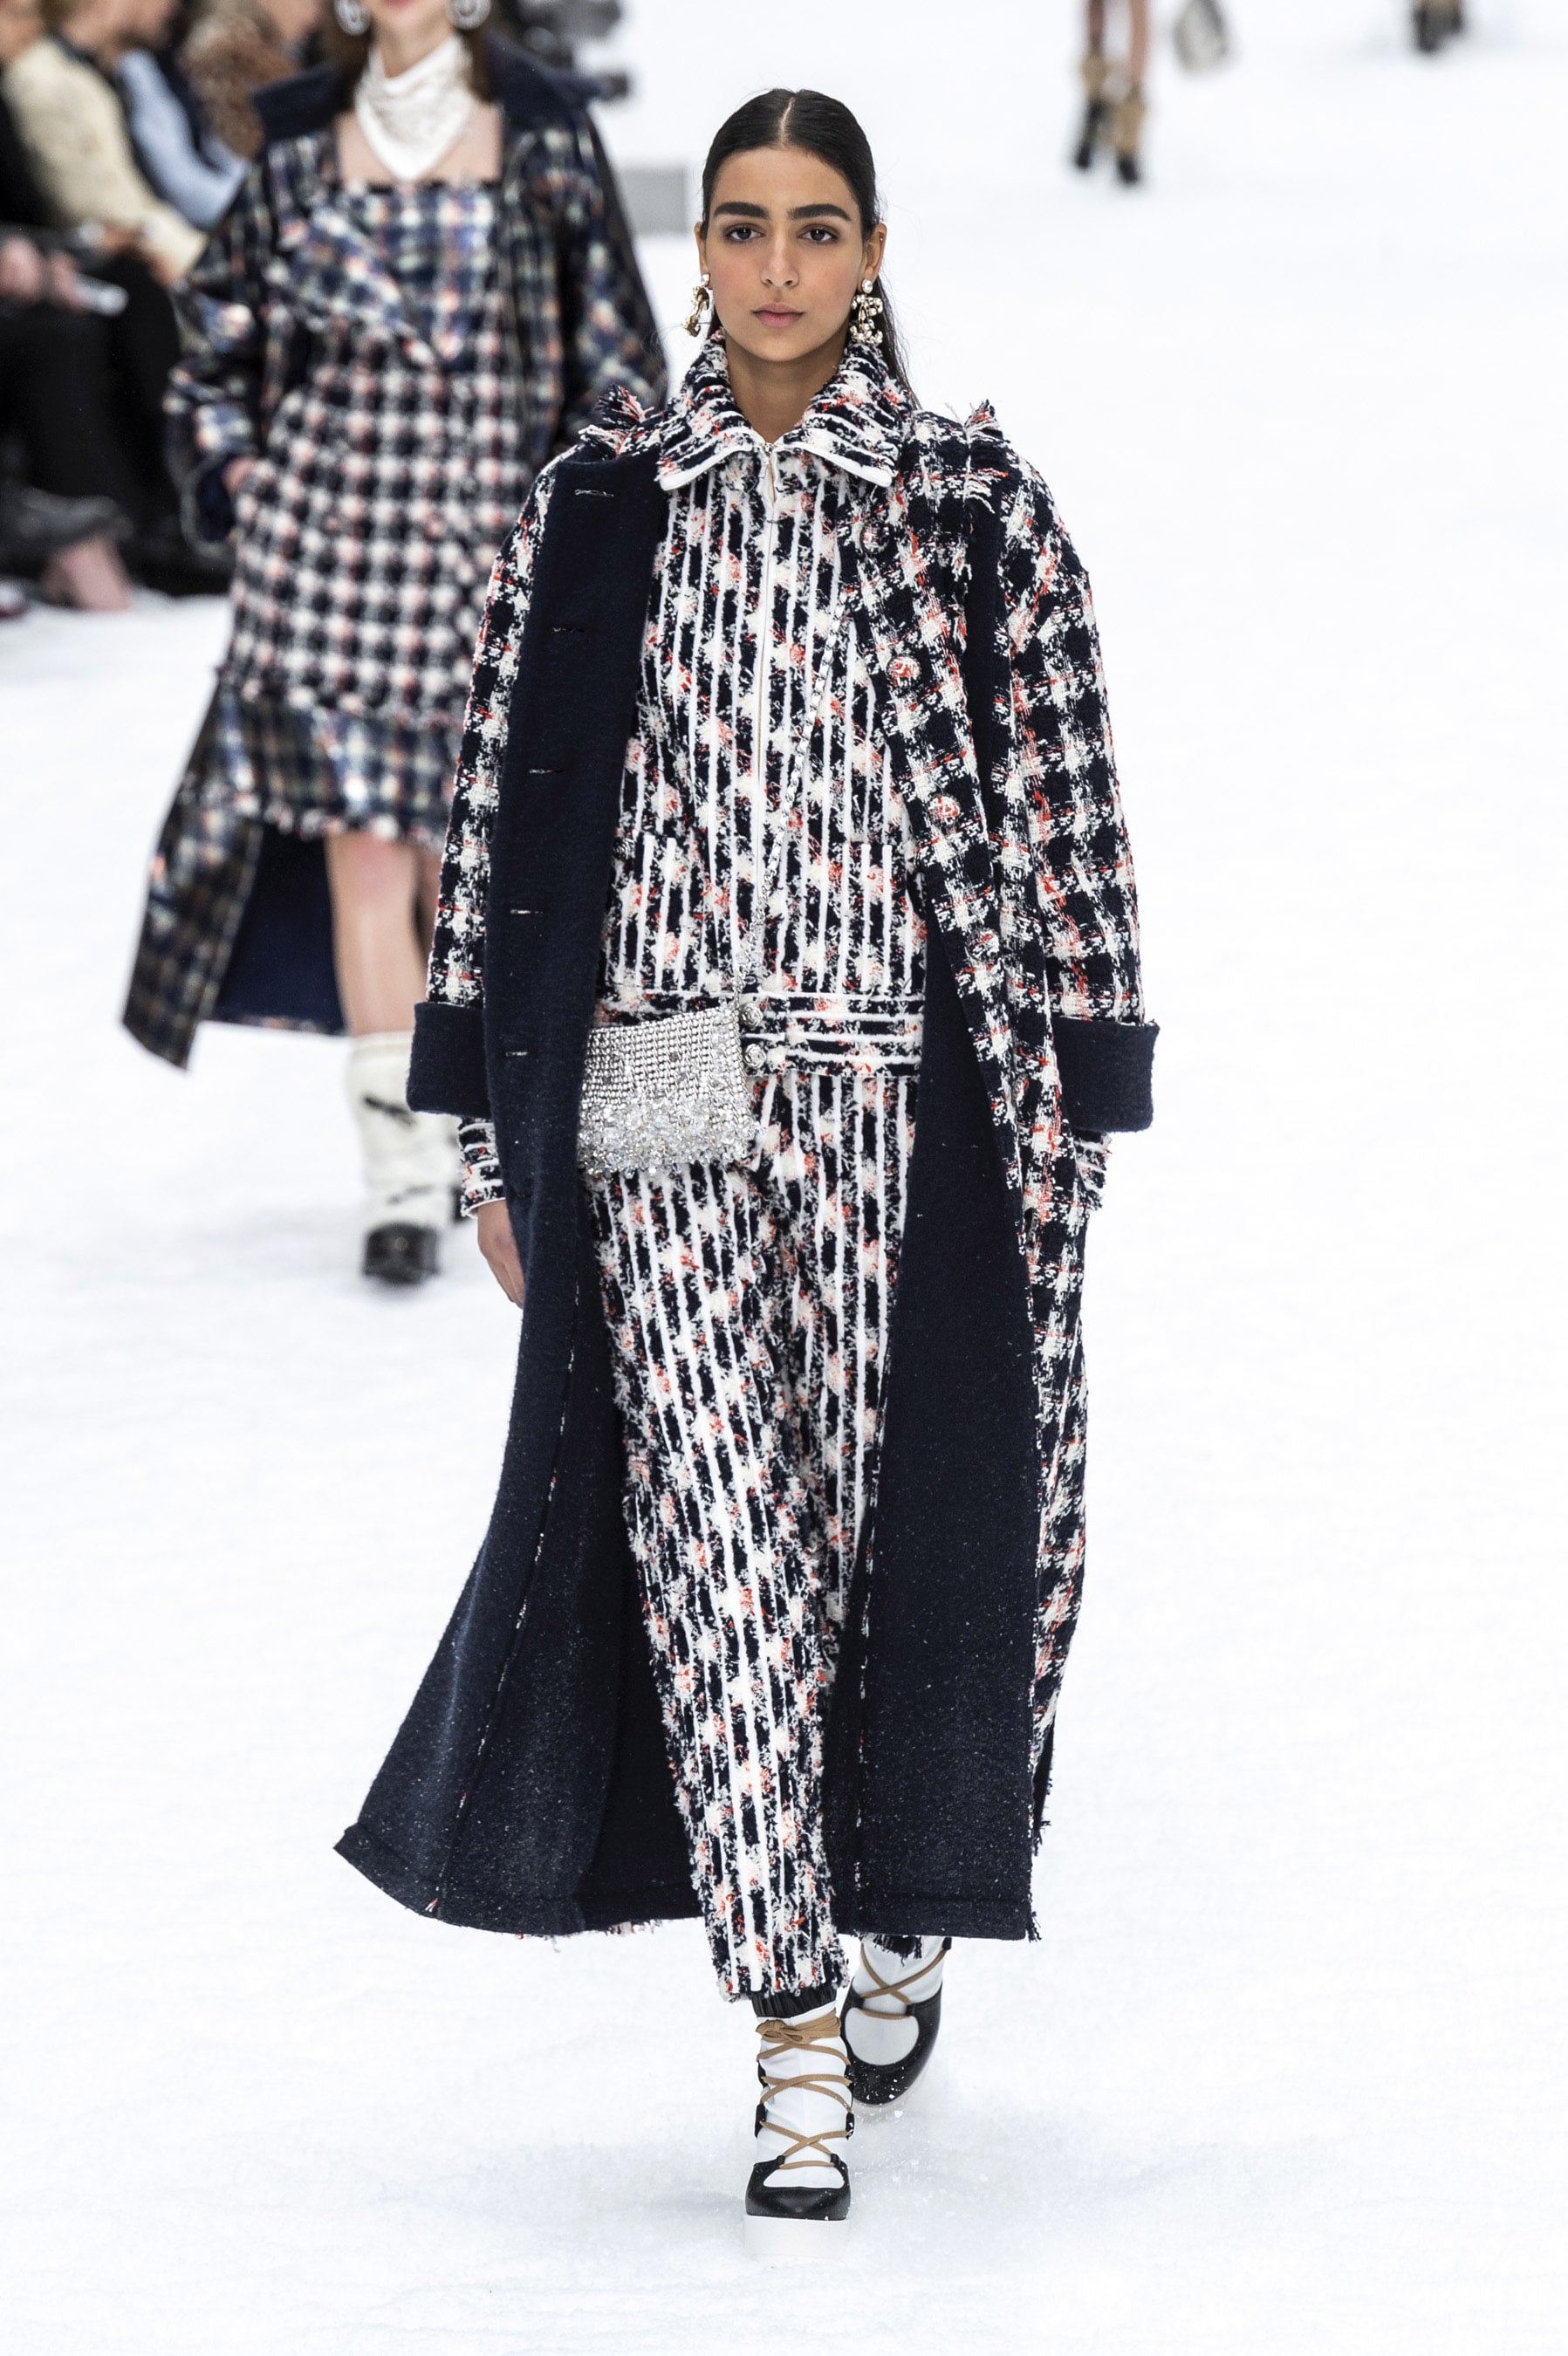 Fashion, Shopping & Style | Chanel Models Stepped Out in the Snow For Karl Lagerfeld's Final Show POPSUGAR Fashion 32